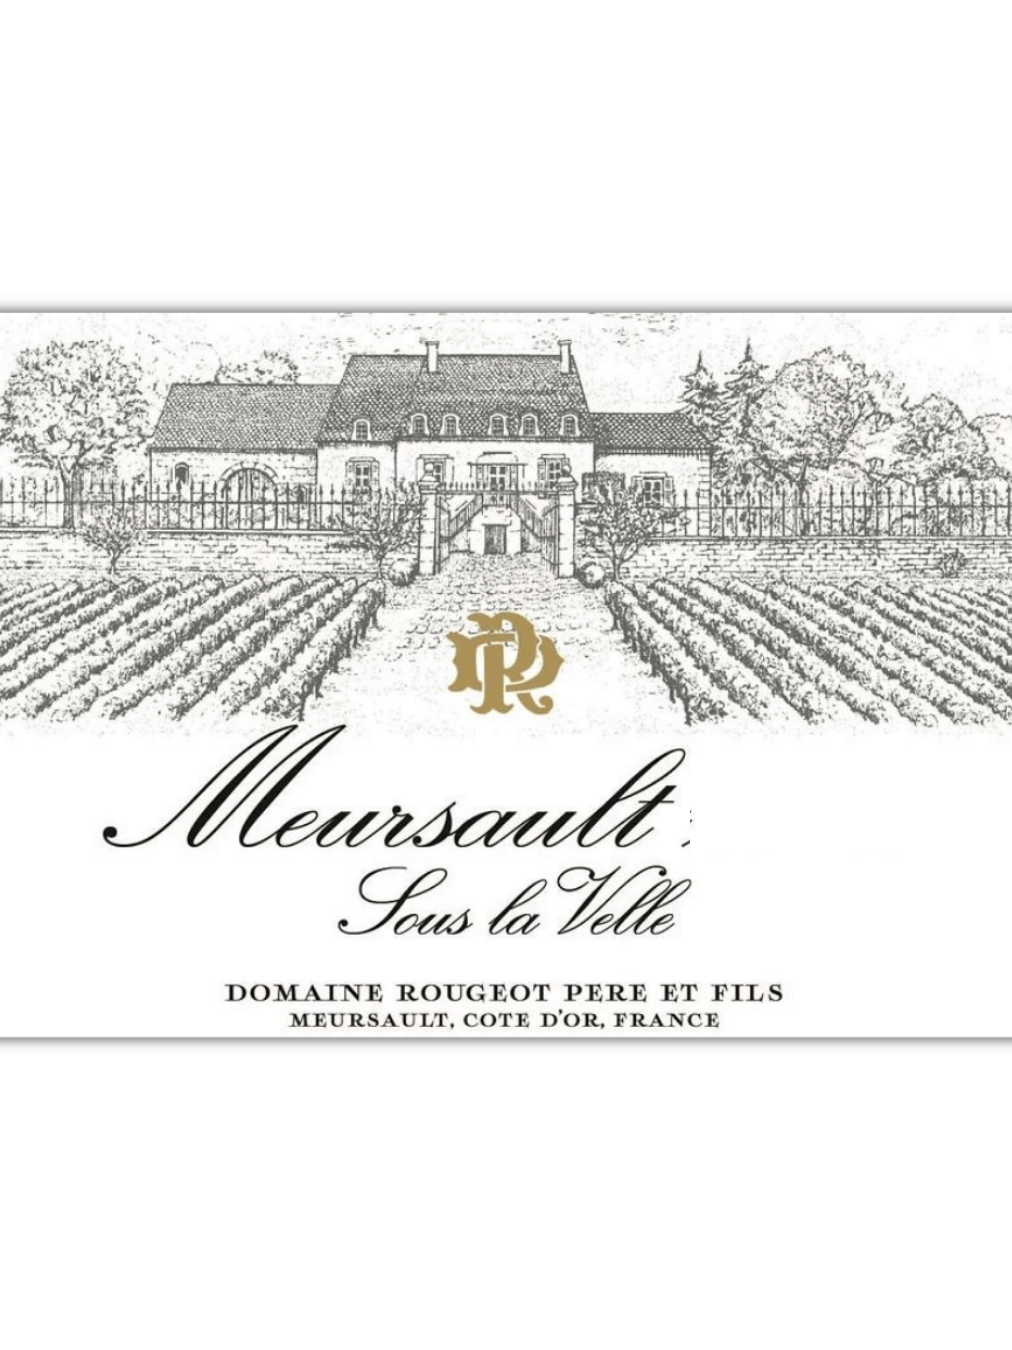 Shop Domaine Rougeot Père & Fils Domaine Rougeot | Meursault Sous la Velle 2019 online at PENTICTON artisanal French wine store in Hong Kong. Discover other French wines, promotions, workshops and featured offers at pentictonpacific.com 